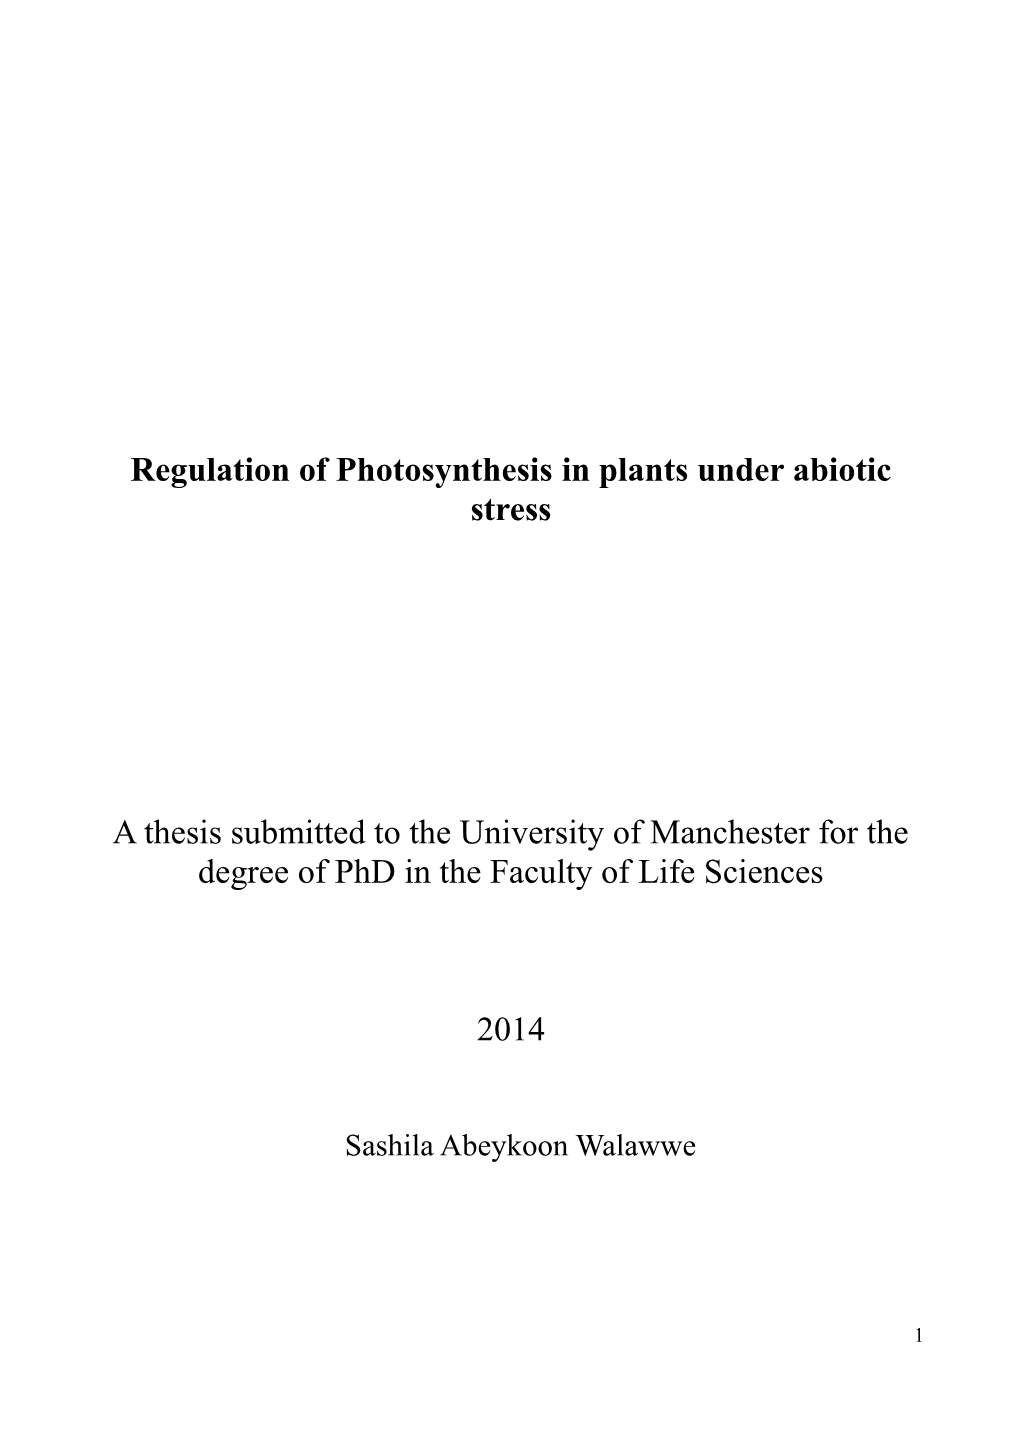 Regulation of Photosynthesis in Plants Under Abiotic Stress a Thesis